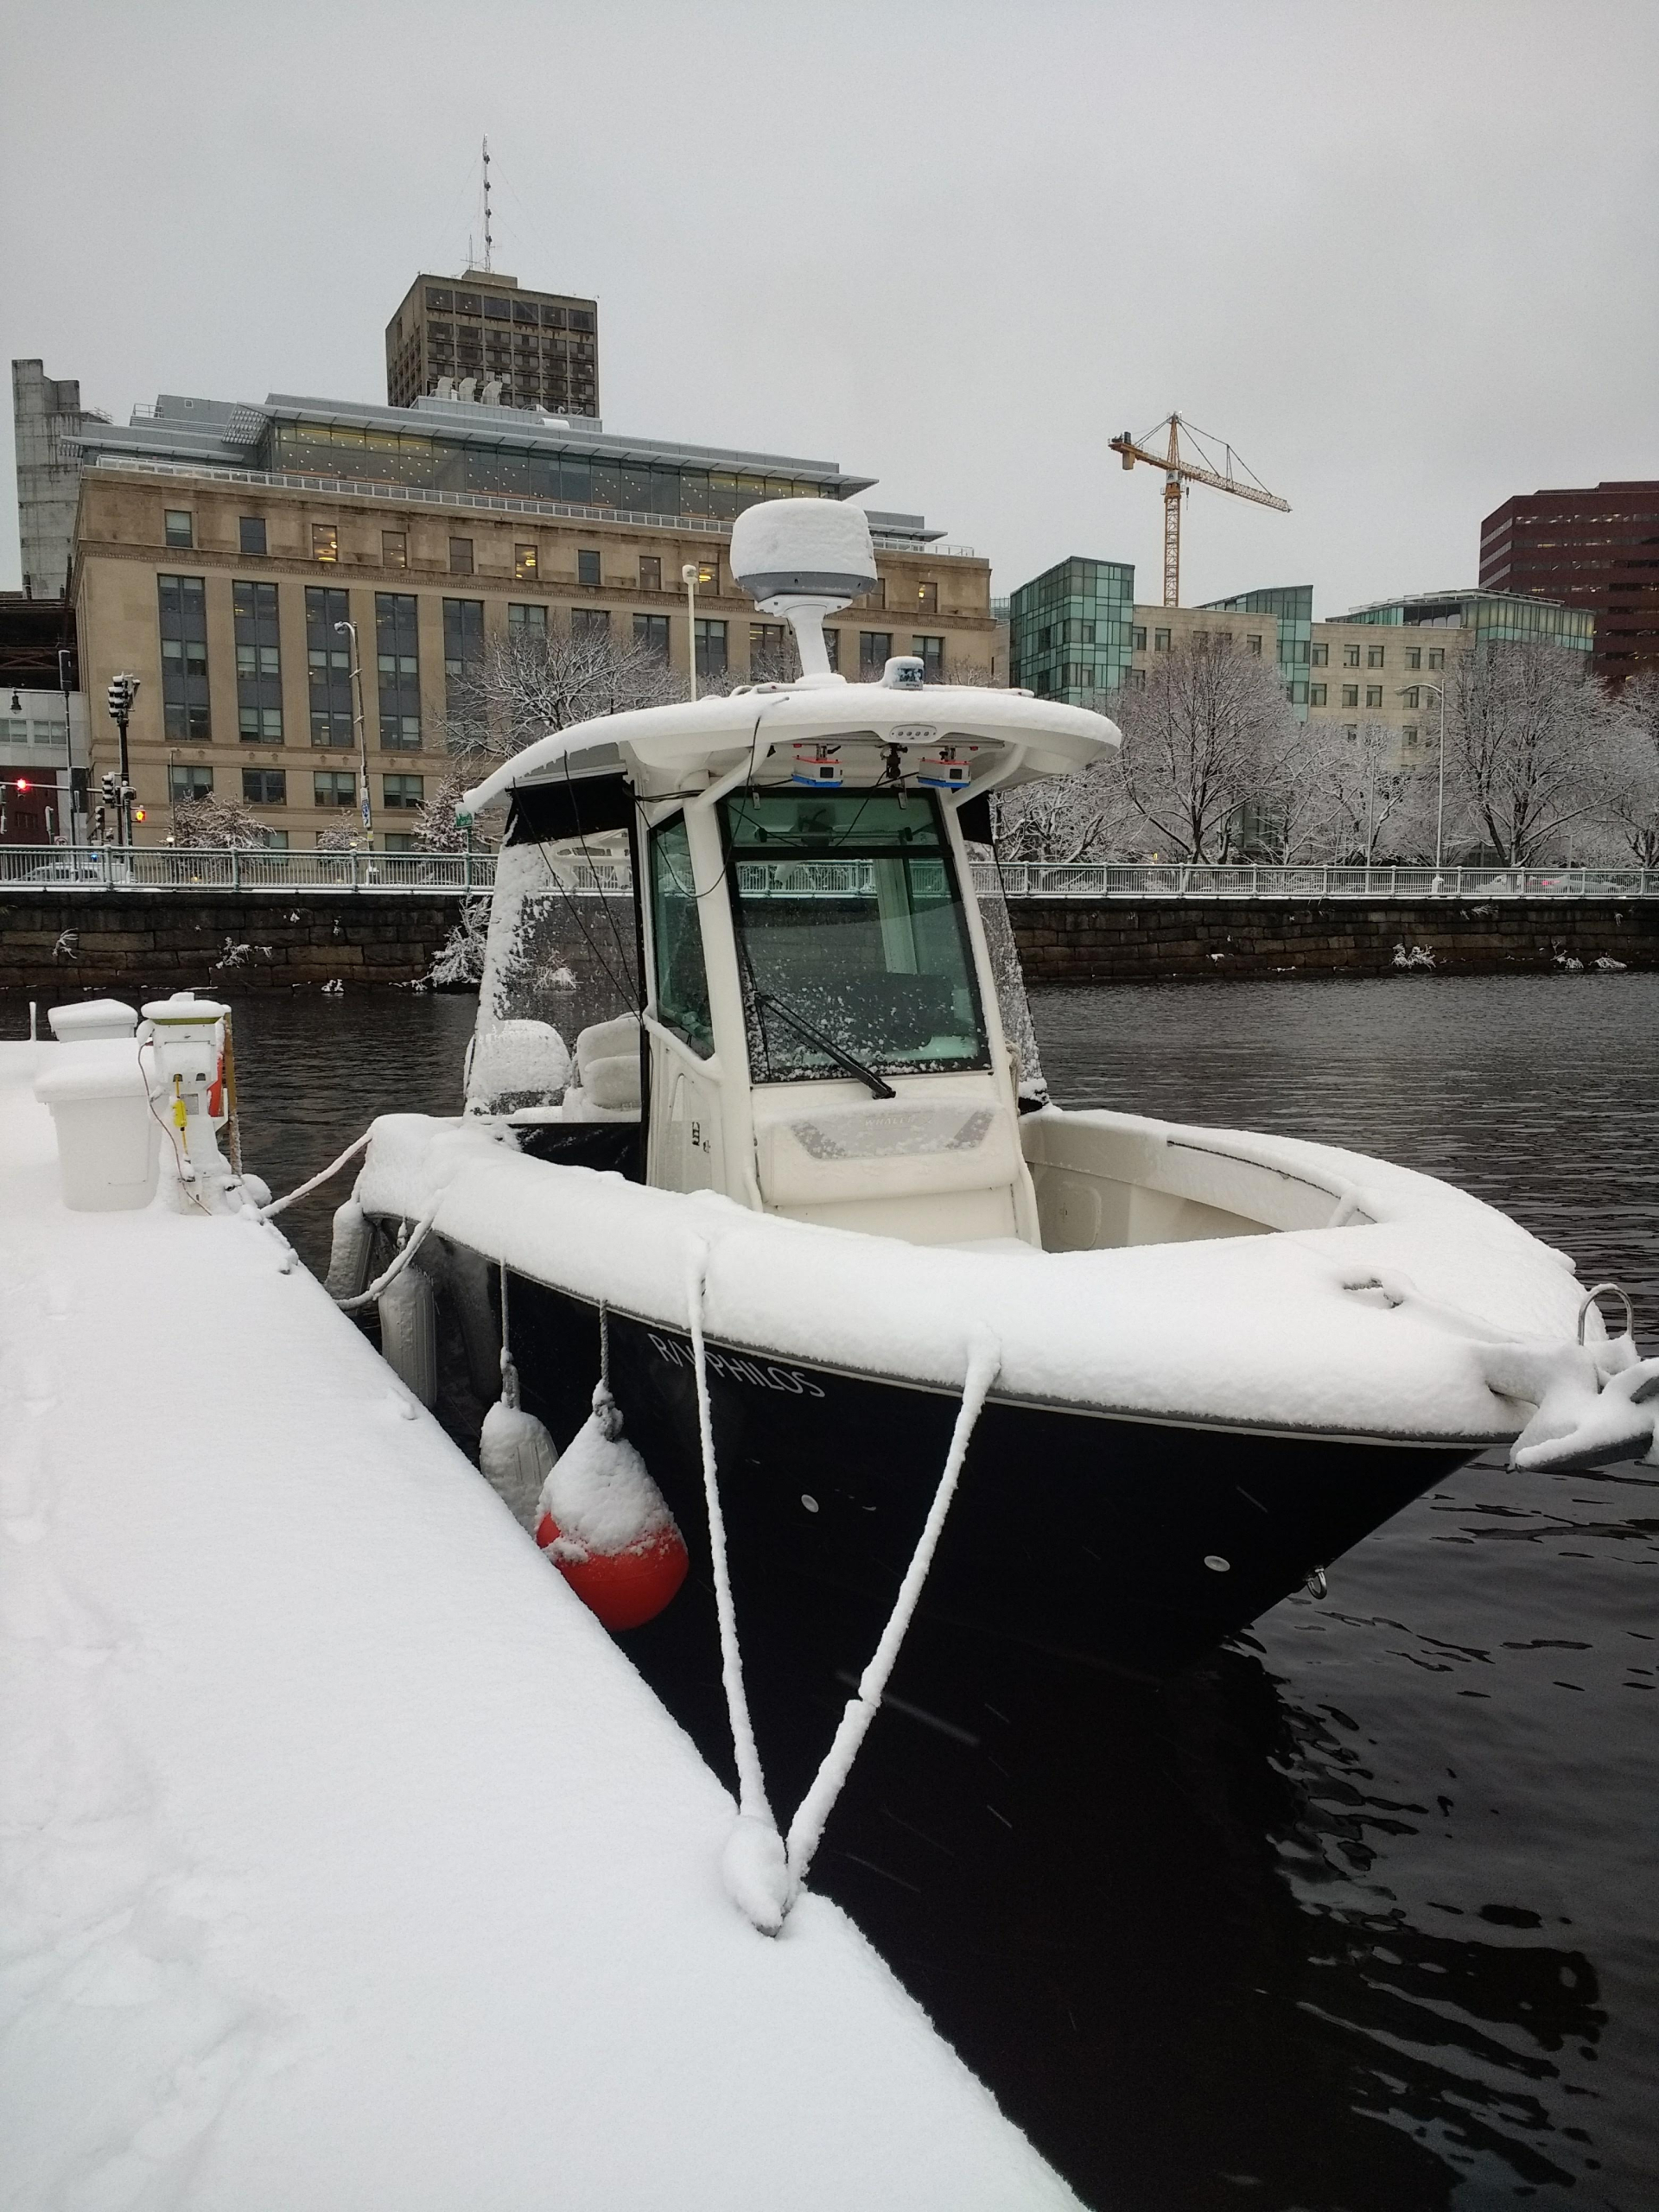 A snow-covered boat